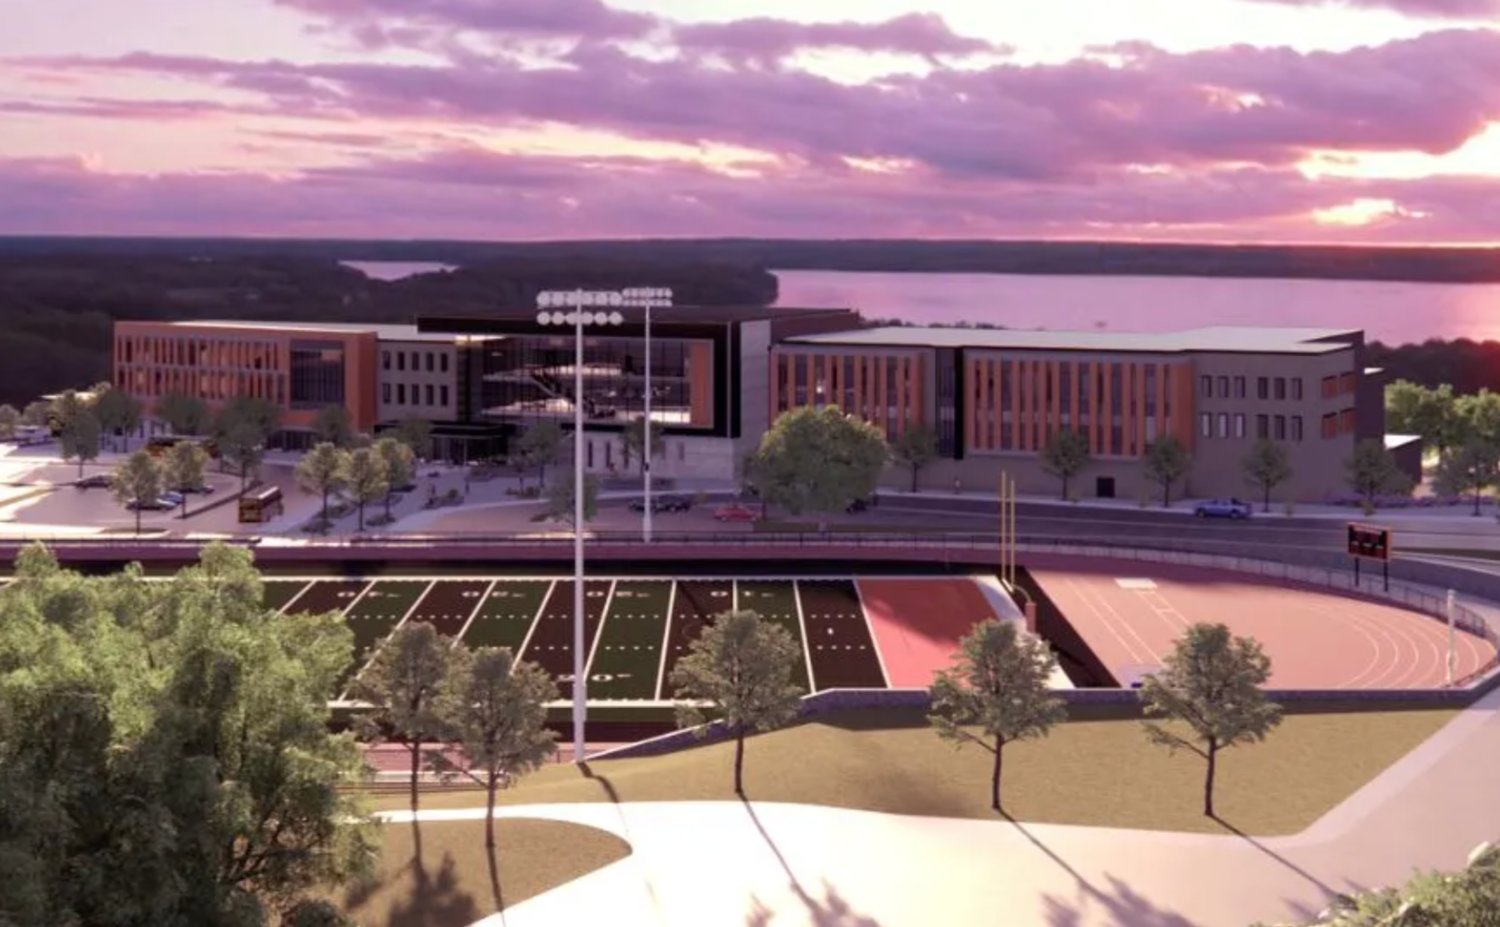 An architectural rendering of what the new Diman regional vocational school would look like.